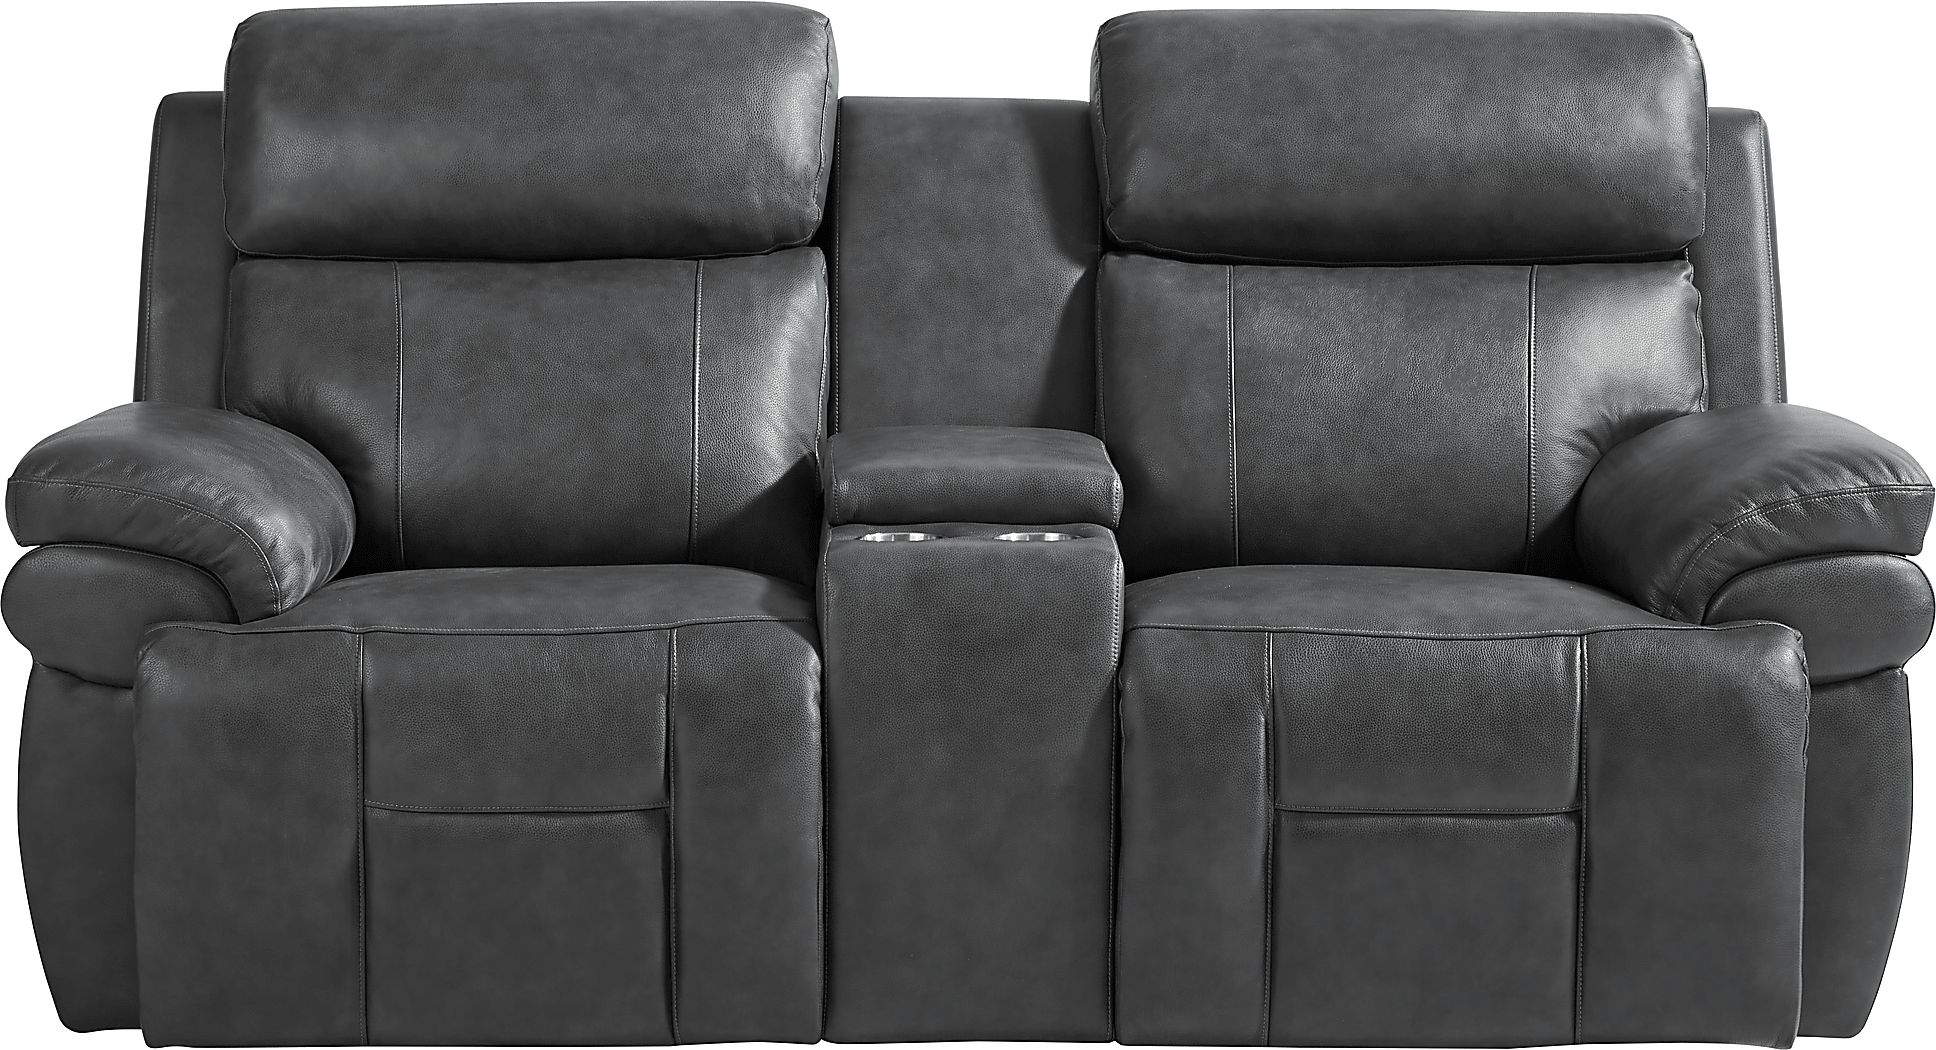 Eastmann Gray Leather 5 Pc Triple Power Reclining Living Room with Air Massage